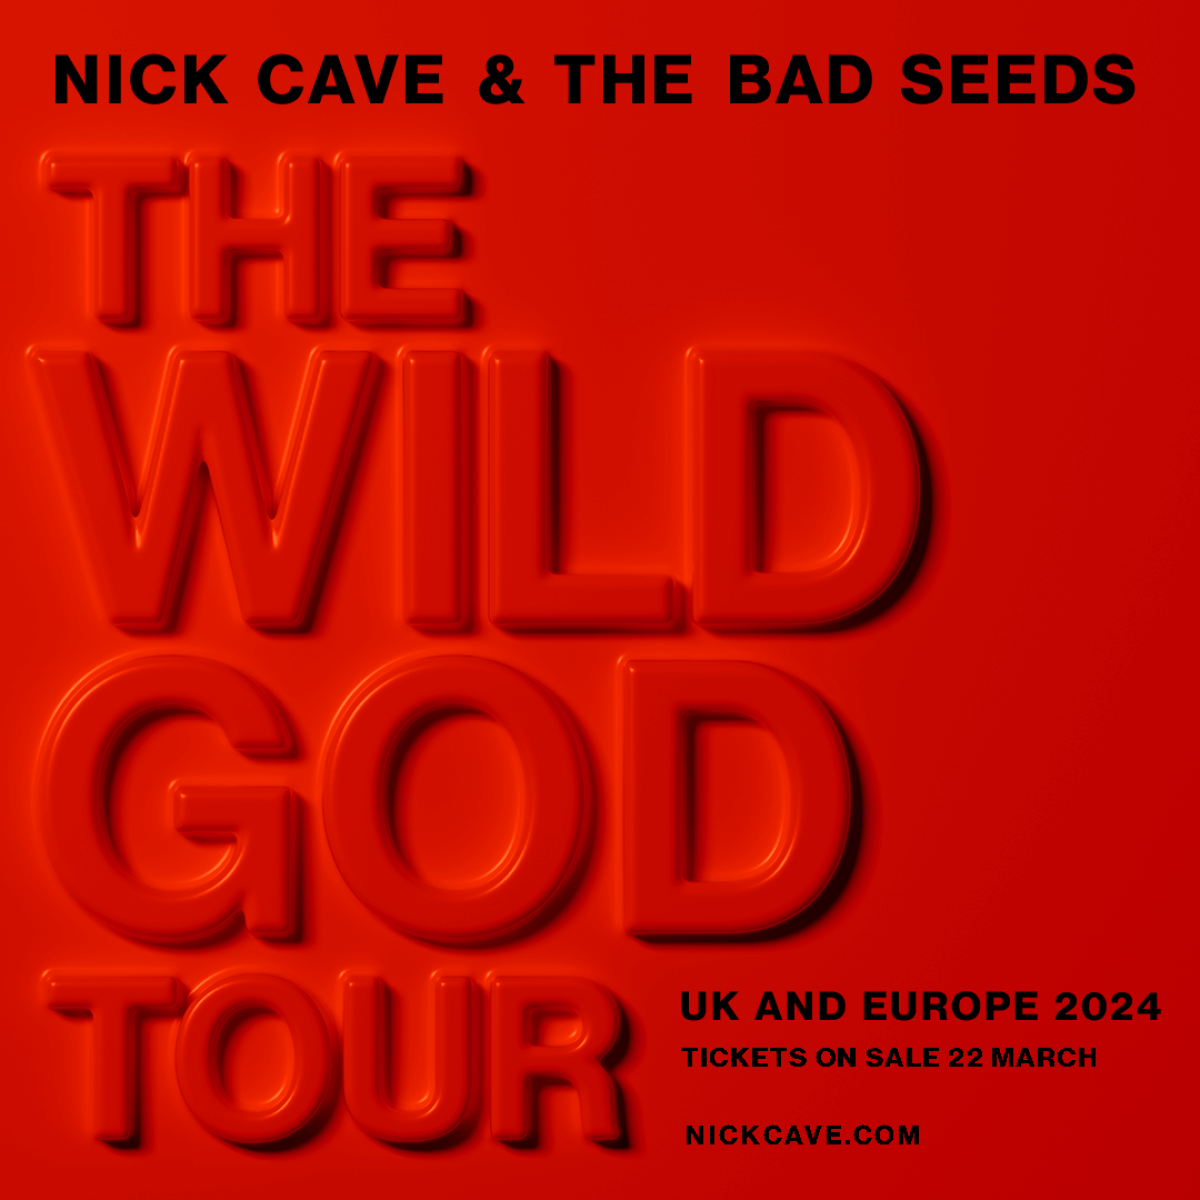 Billets Nick Cave and the Bad Seeds - The Wild God Tour (Barclays Arena - Hambourg)